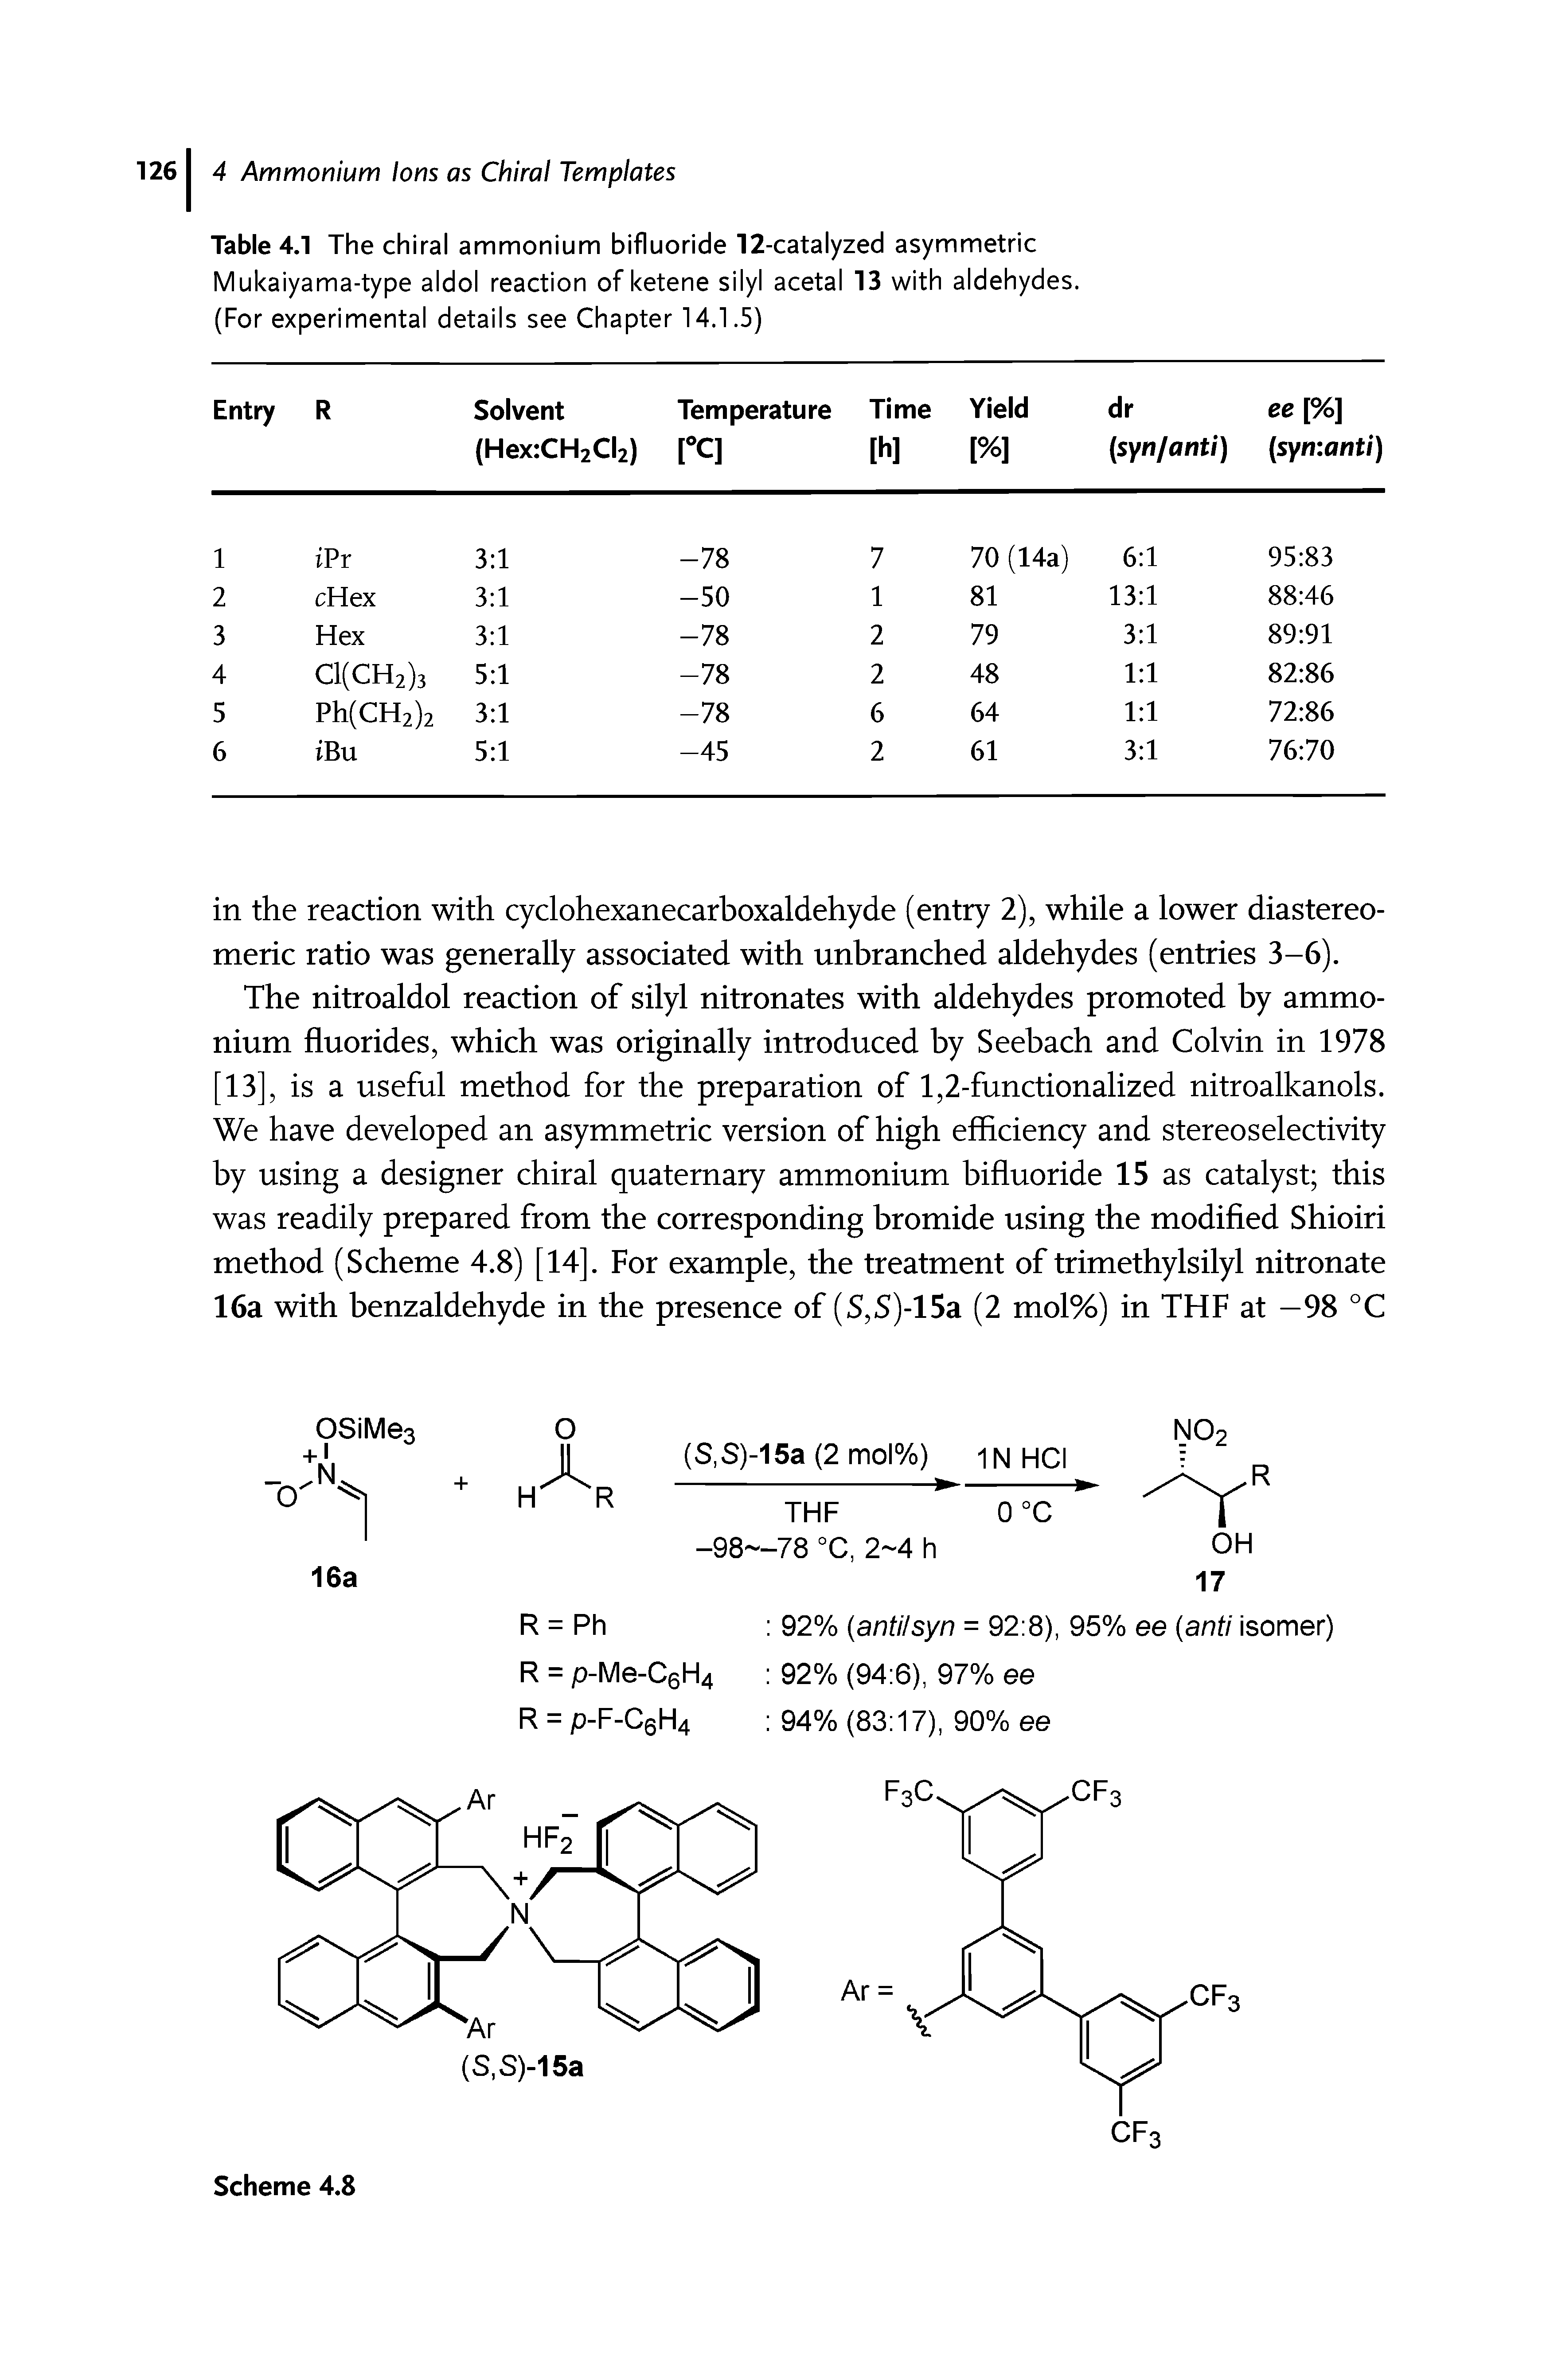 Table 4.1 The chiral ammonium bifluoride 12-catalyzed asymmetric Mukaiyama-type aldol reaction of ketene silyl acetal 13 with aldehydes. (For experimental details see Chapter 14.1.5)...